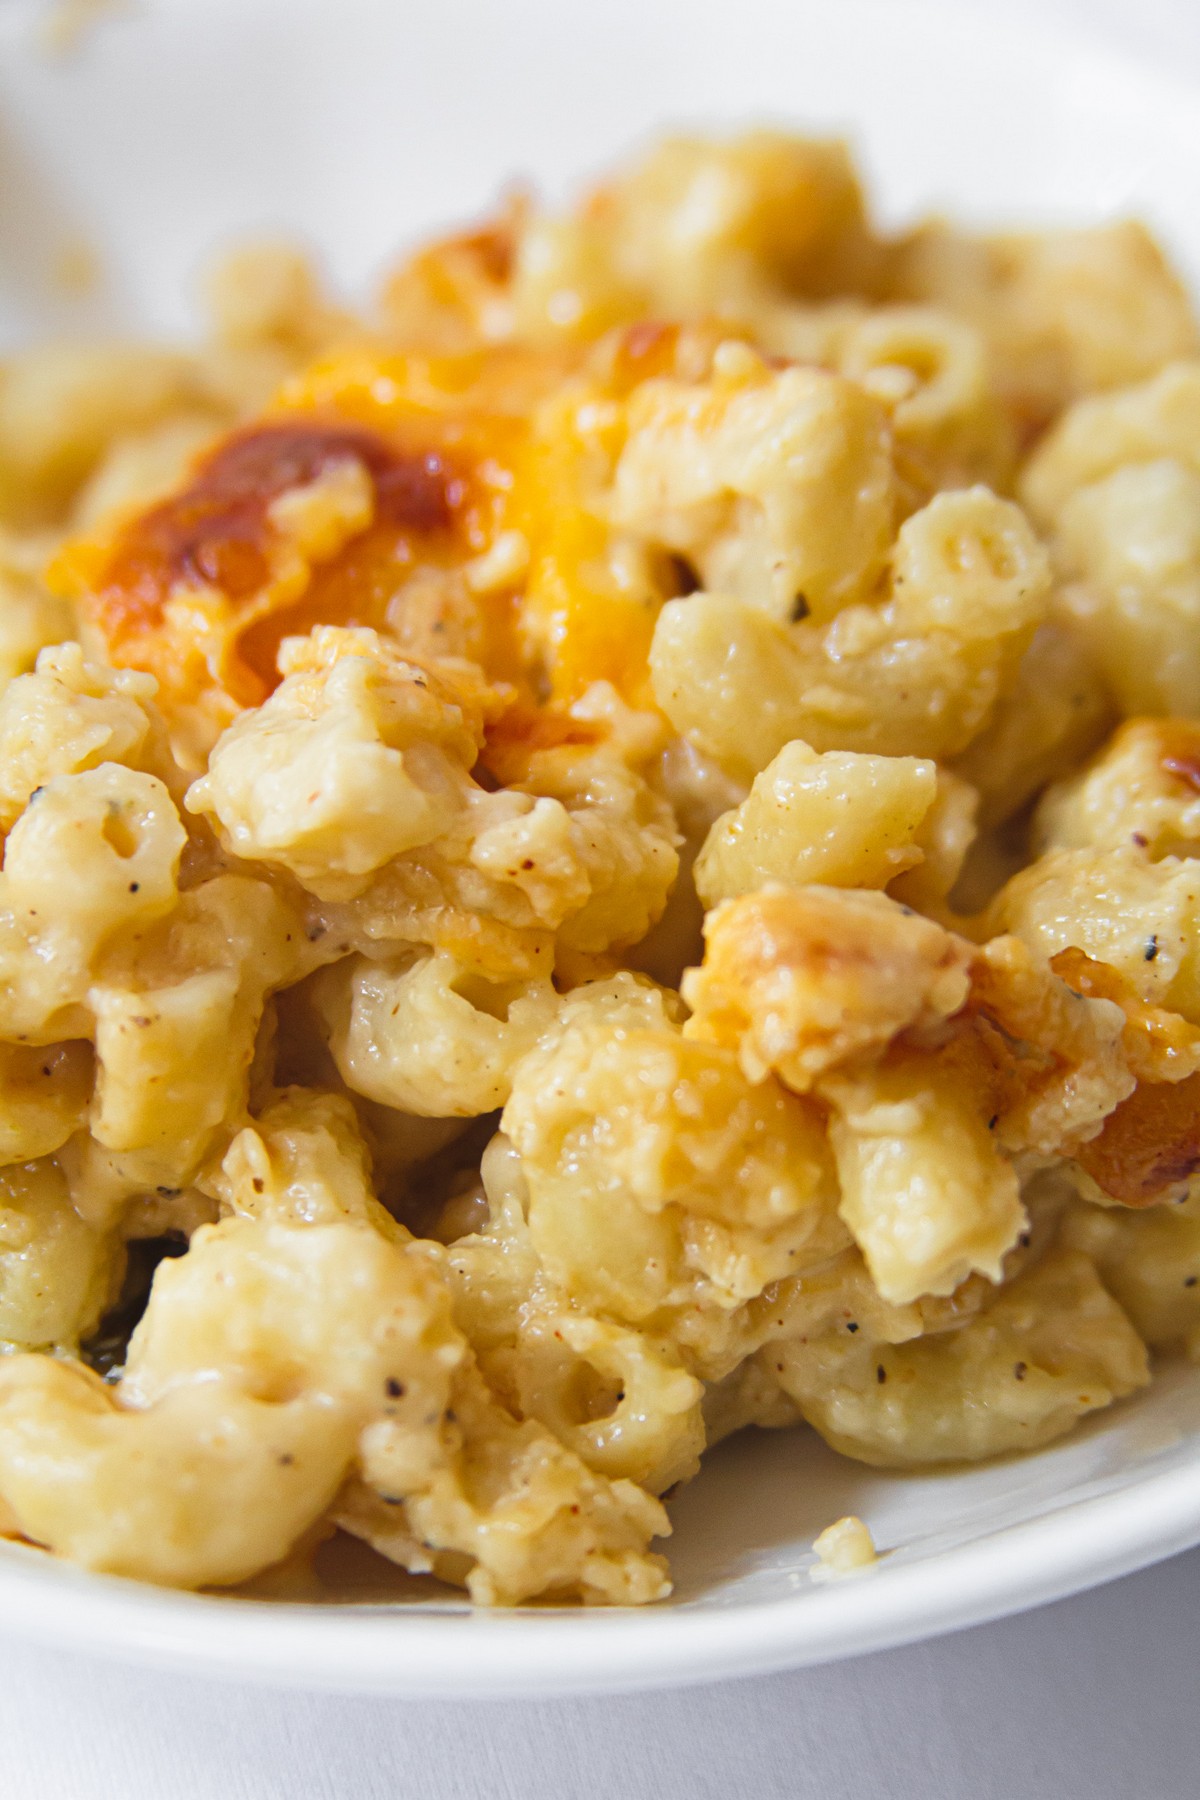 Best Oven-Baked Mac and Cheese Recipe - Southern Cravings